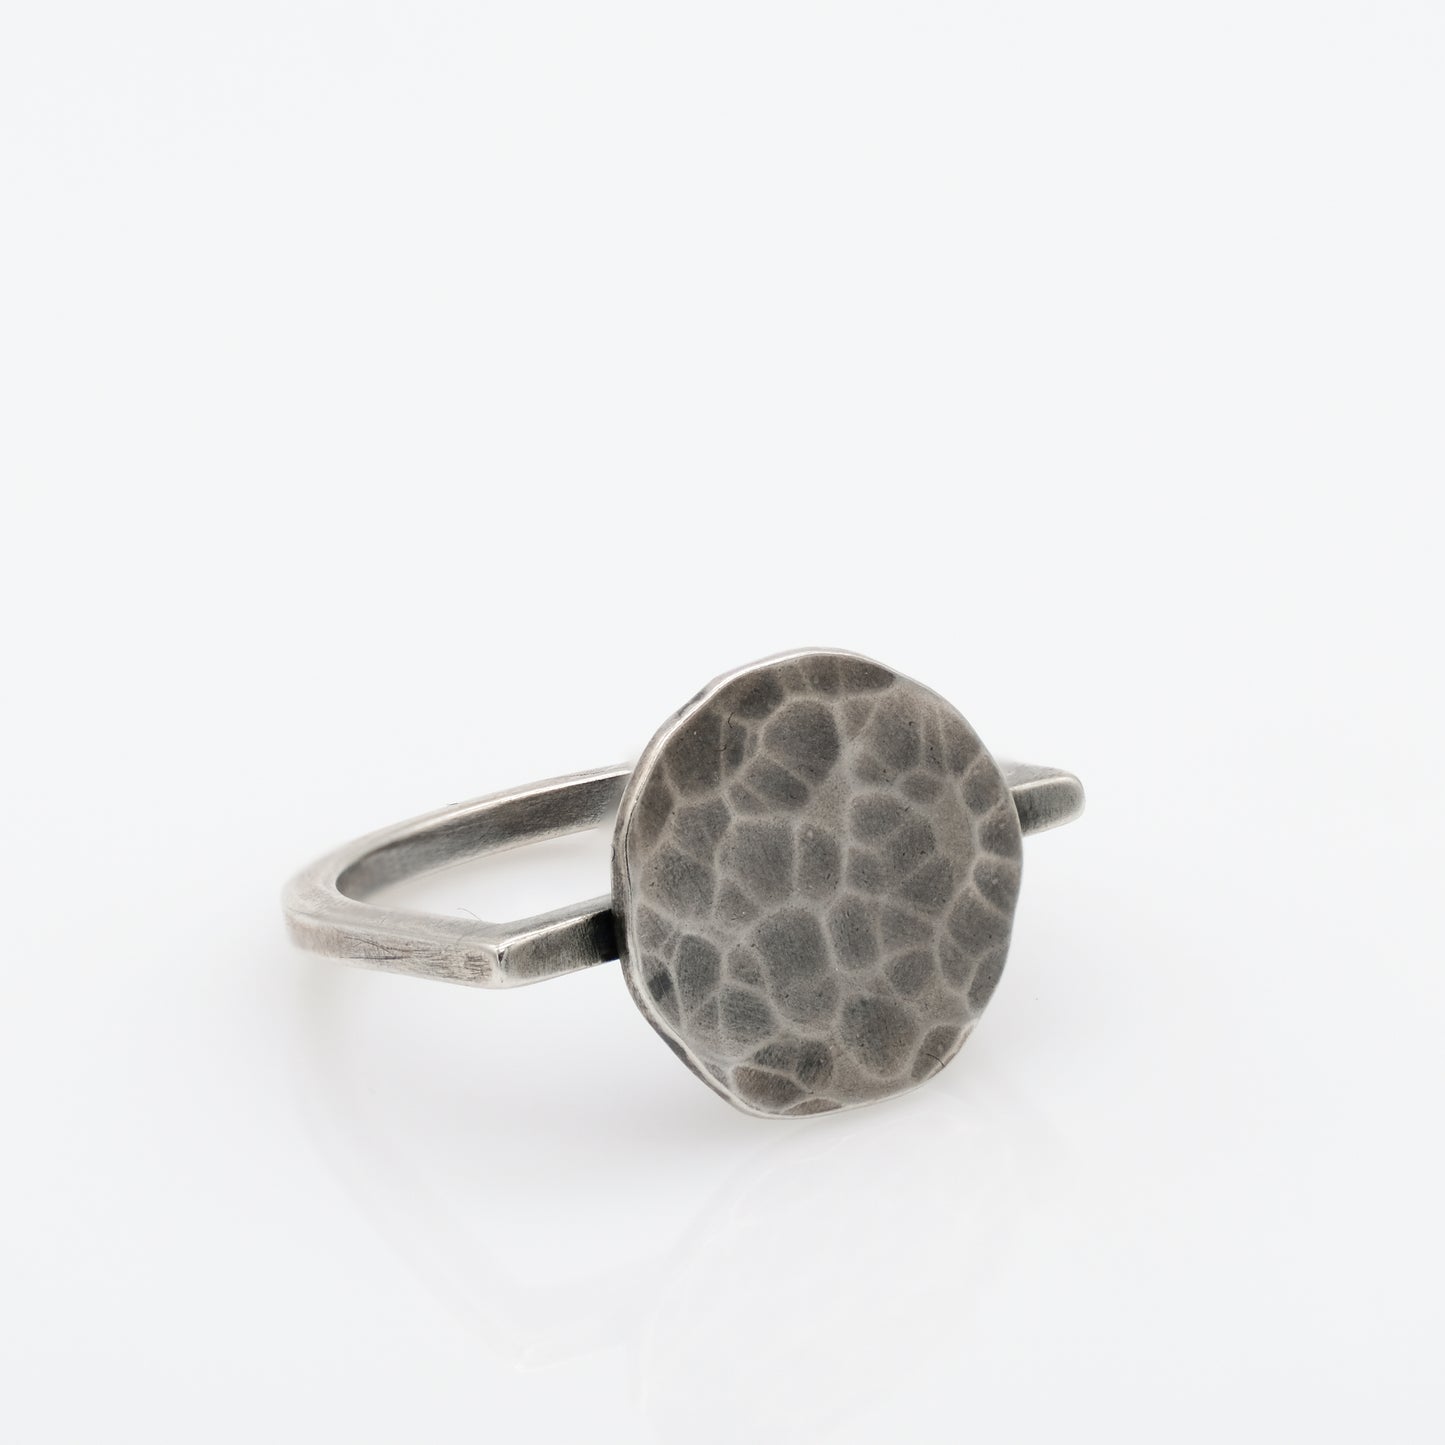 HAMMERED "D" STYLE RING